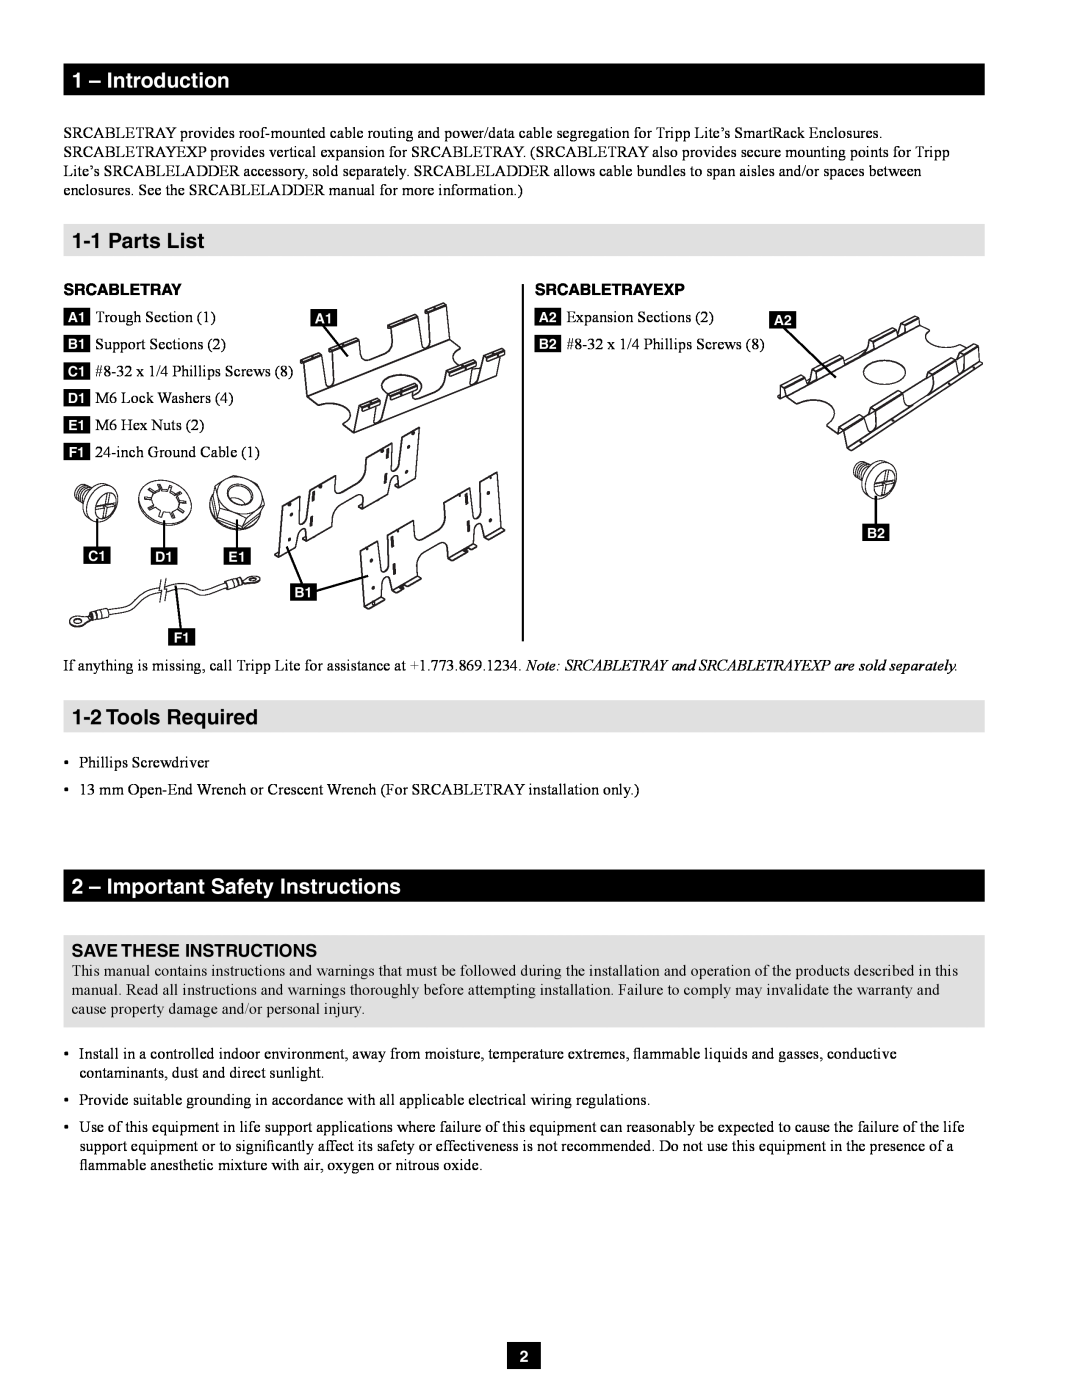 Tripp Lite SRCABLETRAYEXP owner manual 1-1Parts List, 1-2Tools Required, Save These Instructions, Srcabletrayexp 